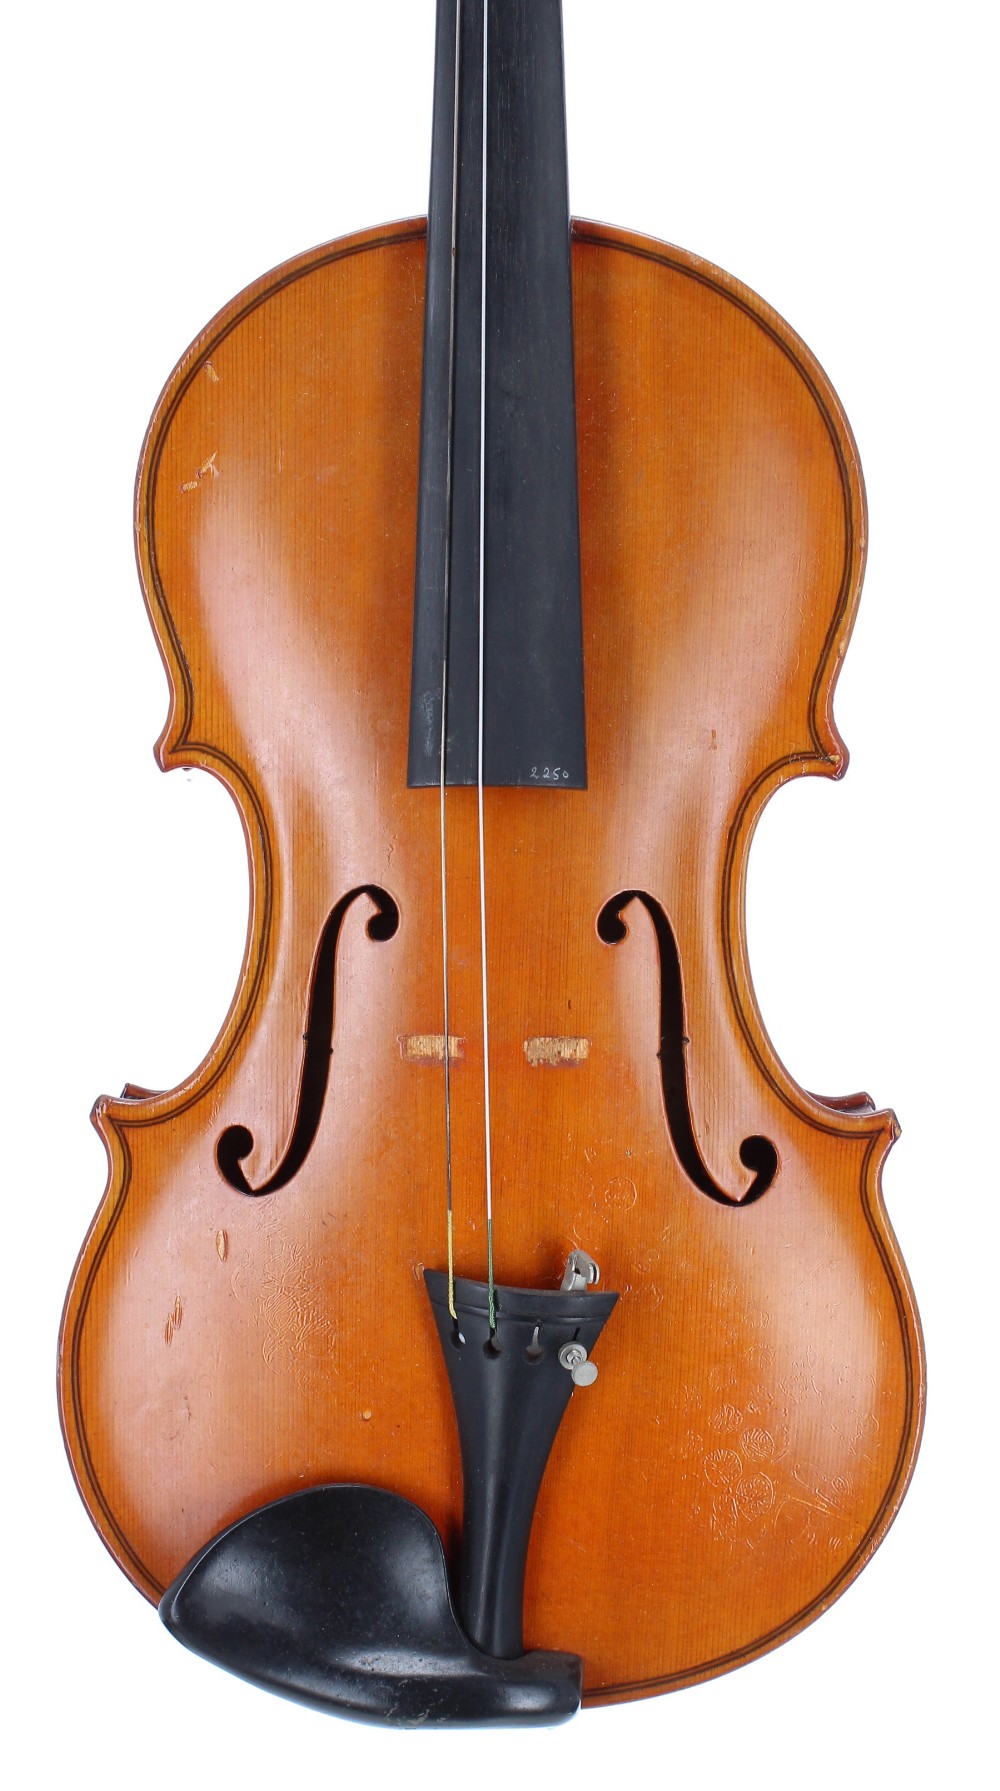 Scottish violin by and labelled John McCarter of Dalkeith, Scotland 1954, 14 1/8", 35.90cm, case